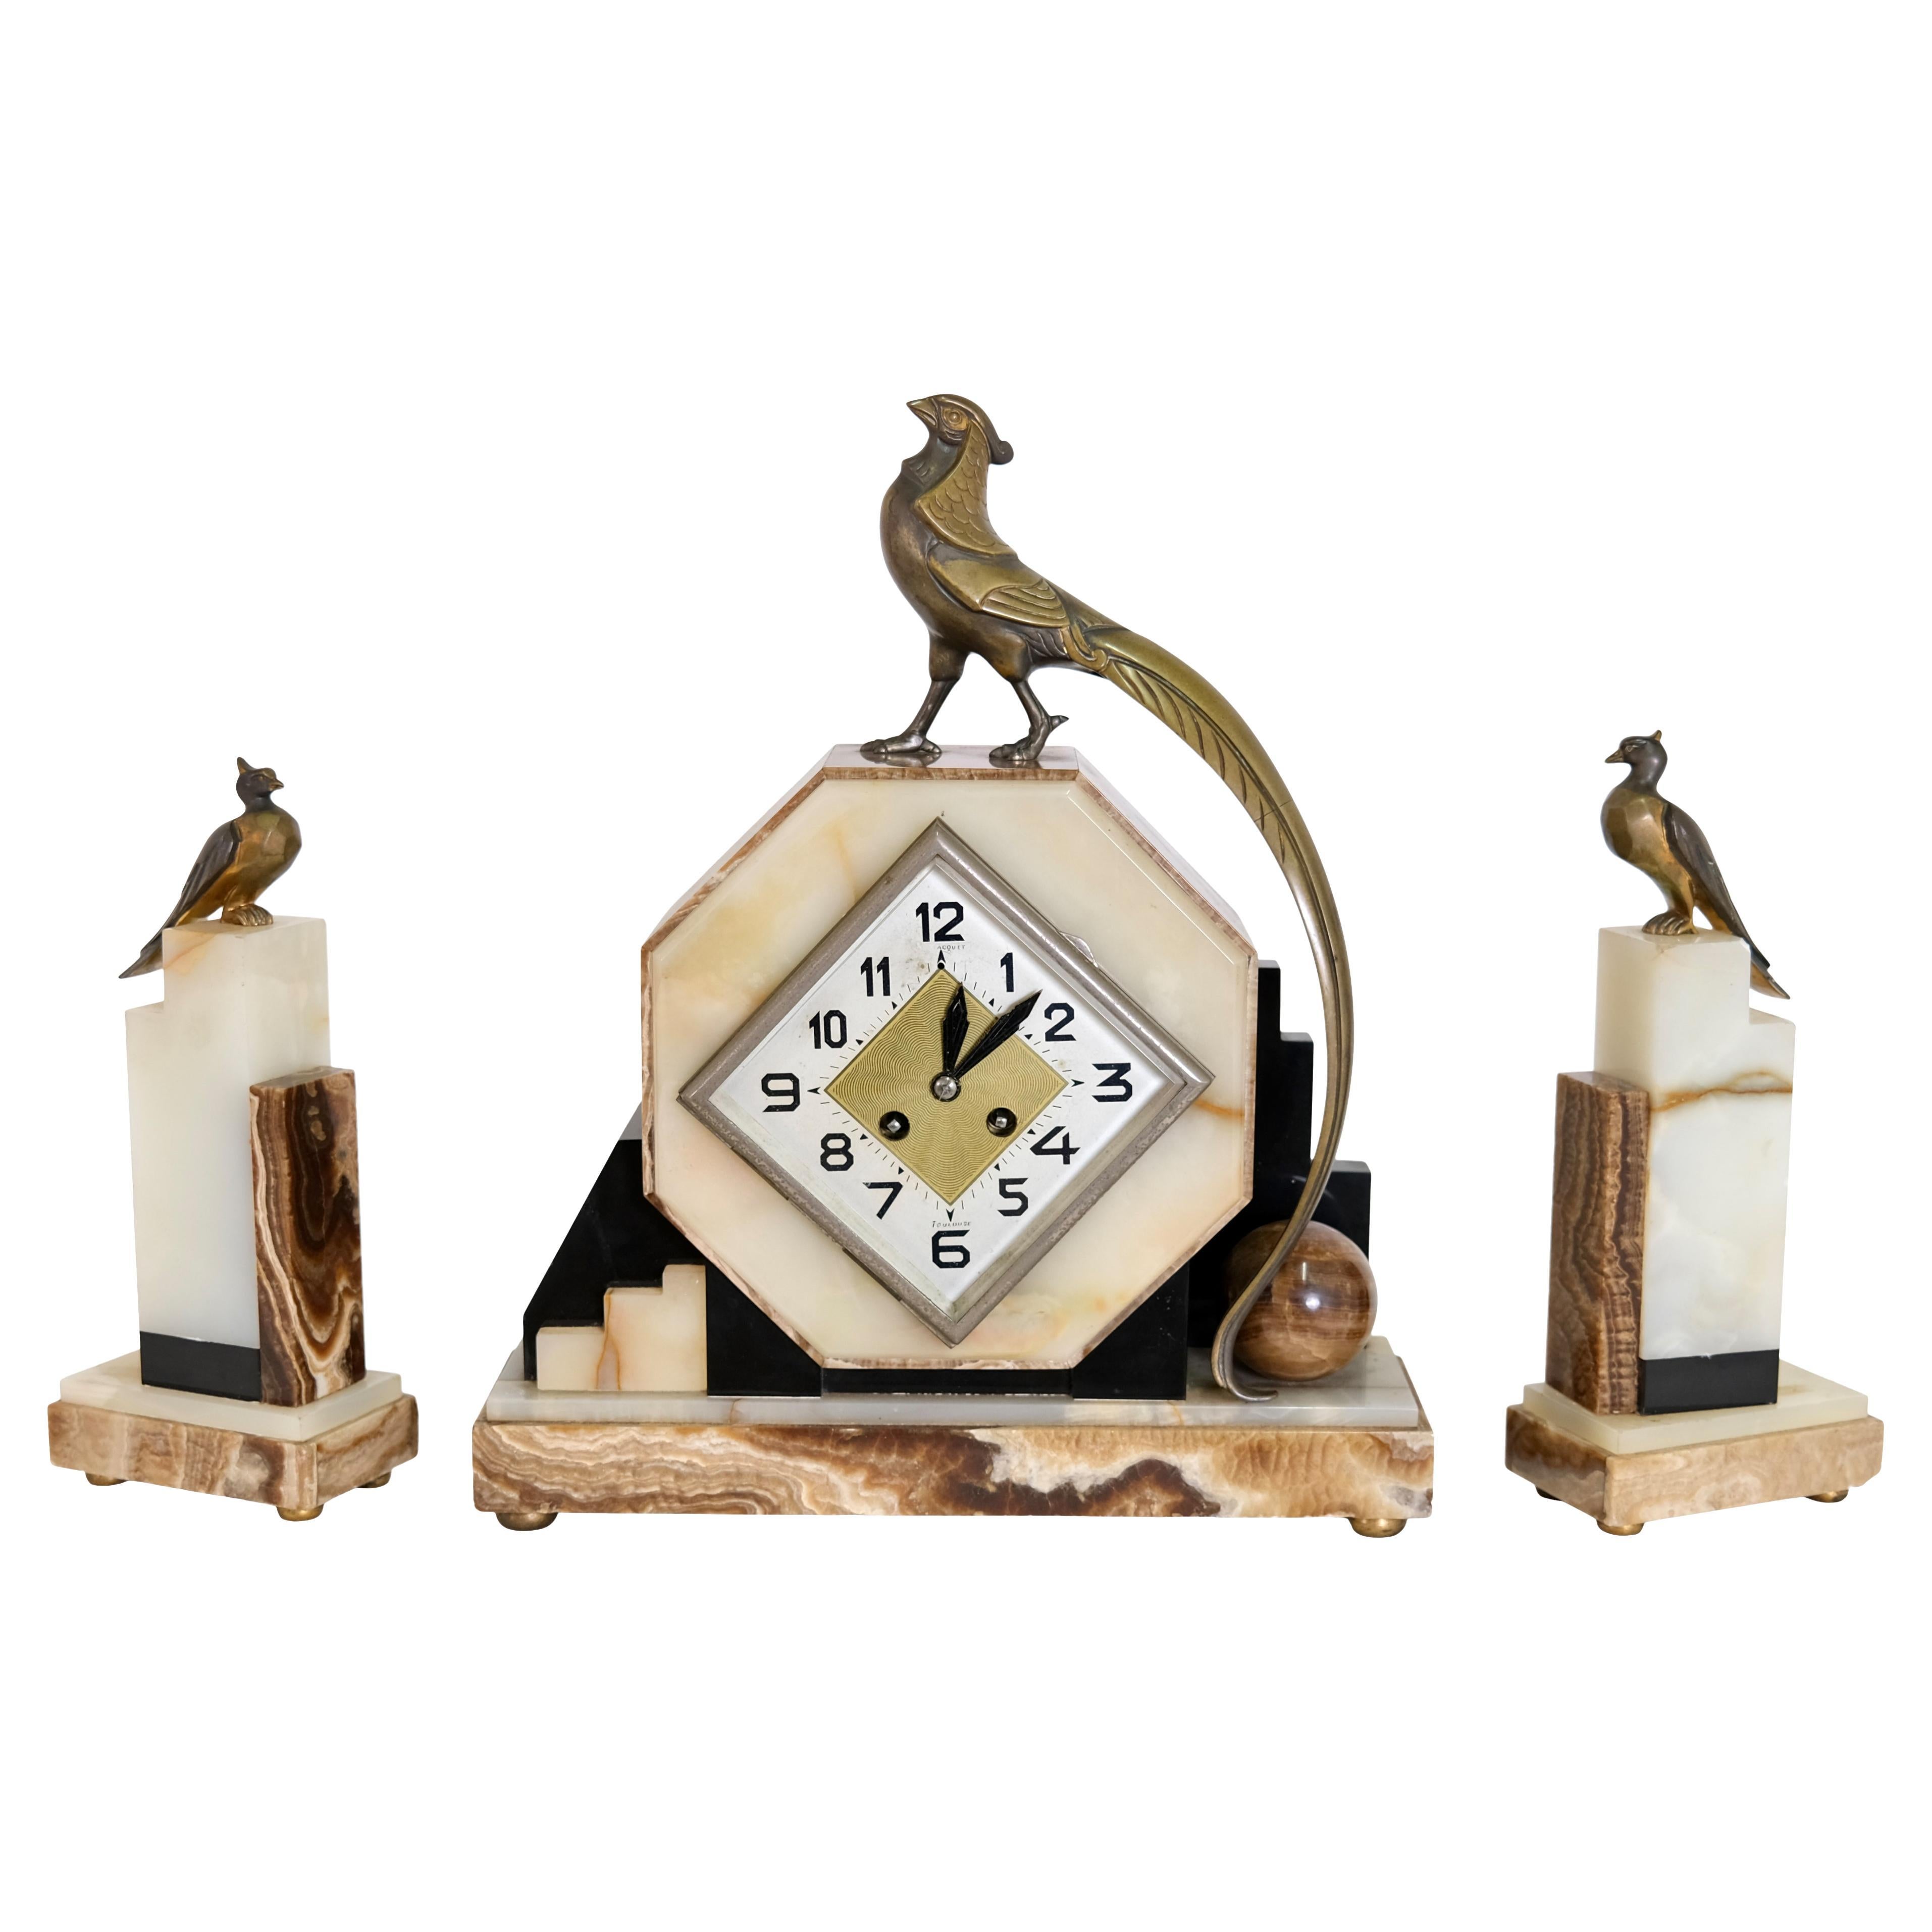 1930s Art Deco Marble Mantel Clock with Bronze Birds by Maurice Frecourt